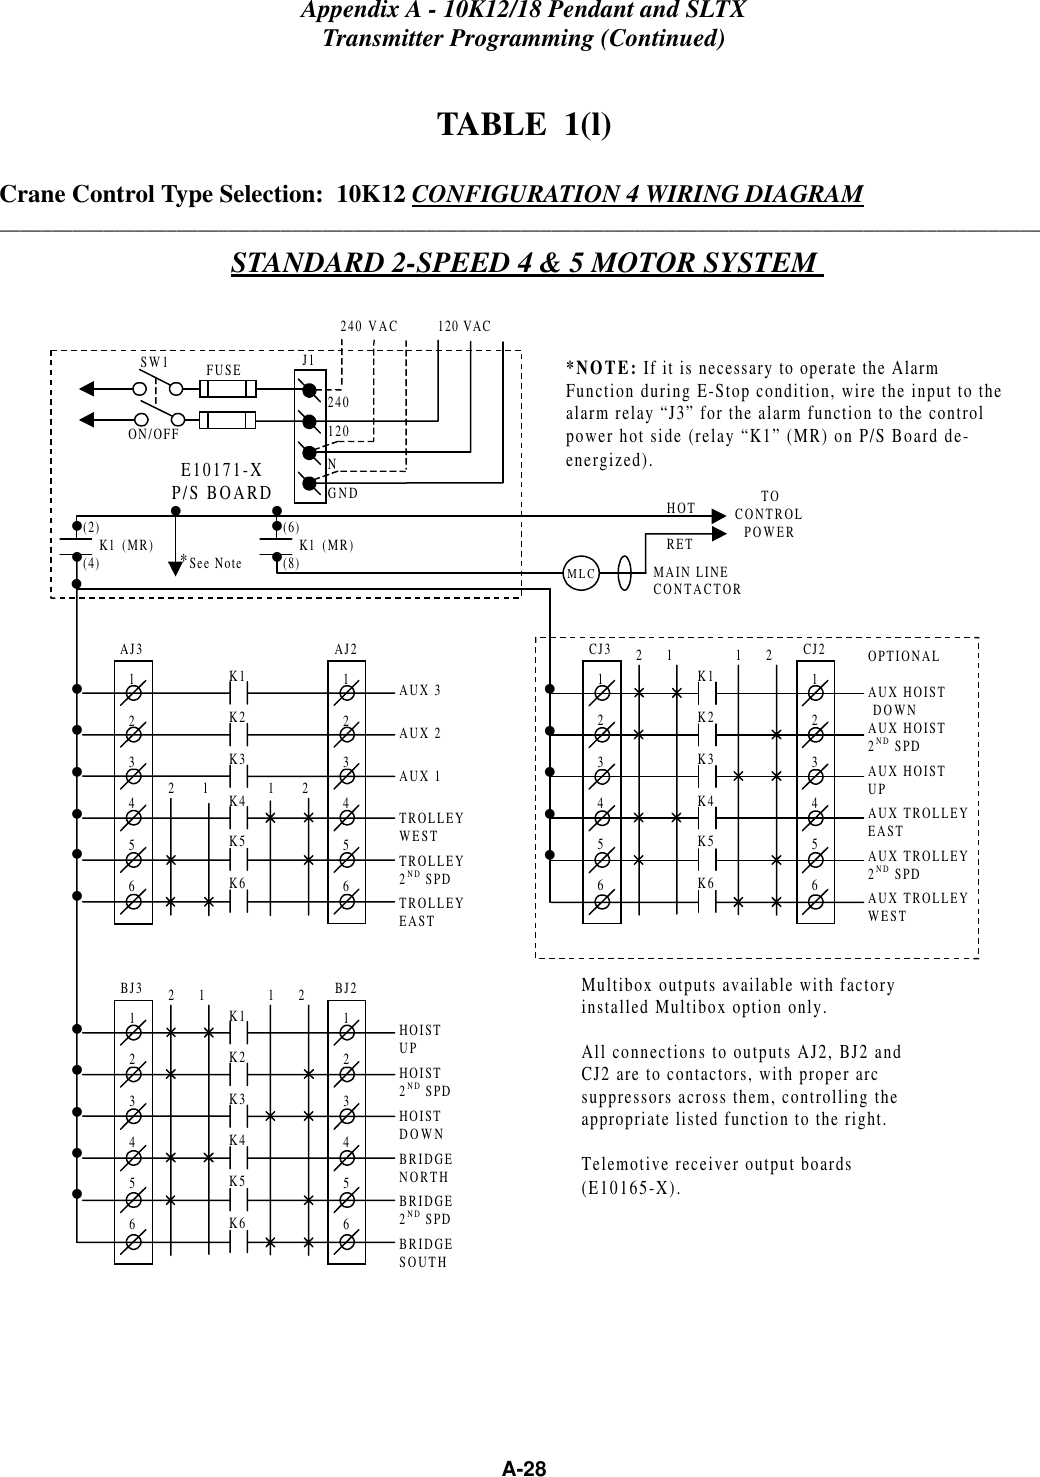 Appendix A - 10K12/18 Pendant and SLTXTransmitter Programming (Continued)A-28TABLE  1(l)Crane Control Type Selection:  10K12 CONFIGURATION 4 WIRING DIAGRAM____________________________________________________________________________________________________STANDARD 2-SPEED 4 &amp; 5 MOTOR SYSTEM BJ3123456BJ2123456K1K2K3K4K5K62      1 1      2HOISTUPHOIST2ND SPDHOISTDOWNBRIDGENORTHBRIDGE2ND SPDBRIDGESOUTH•••••*NOTE: If it is necessary to operate the AlarmFunction during E-Stop condition, wire the input to thealarm relay “J3” for the alarm function to the controlpower hot side (relay “K1” (MR) on P/S Board de-energized).Multibox outputs available with factoryinstalled Multibox option only.All connections to outputs AJ2, BJ2 andCJ2 are to contactors, with proper arcsuppressors across them, controlling theappropriate listed function to the right.Telemotive receiver output boards(E10165-X).240 VAC          120 VACSW1ON/OFFE10171-XP/S BOARDMAIN LINECONTACTORTOCONTROLPOWERHOTRET(2)    K1 (MR)(4)•••*See Note•240120FUSE J1NGND(6)    K1 (MR)(8)•••AJ3123456AJ21234562       1 1       2AUX 3AUX 2AUX 1TROLLEYWESTTROLLEY2ND SPDTROLLEYEAST••••••CJ3123456CJ2123456K1K2K3K4K5K6OPTIONALAUX HOIST DOWNAUX HOIST2ND SPDAUX HOISTUPAUX TROLLEYEASTAUX TROLLEY2ND SPDAUX TROLLEYWEST•••••K1K2K3K4K5K62      1 1      2MLC